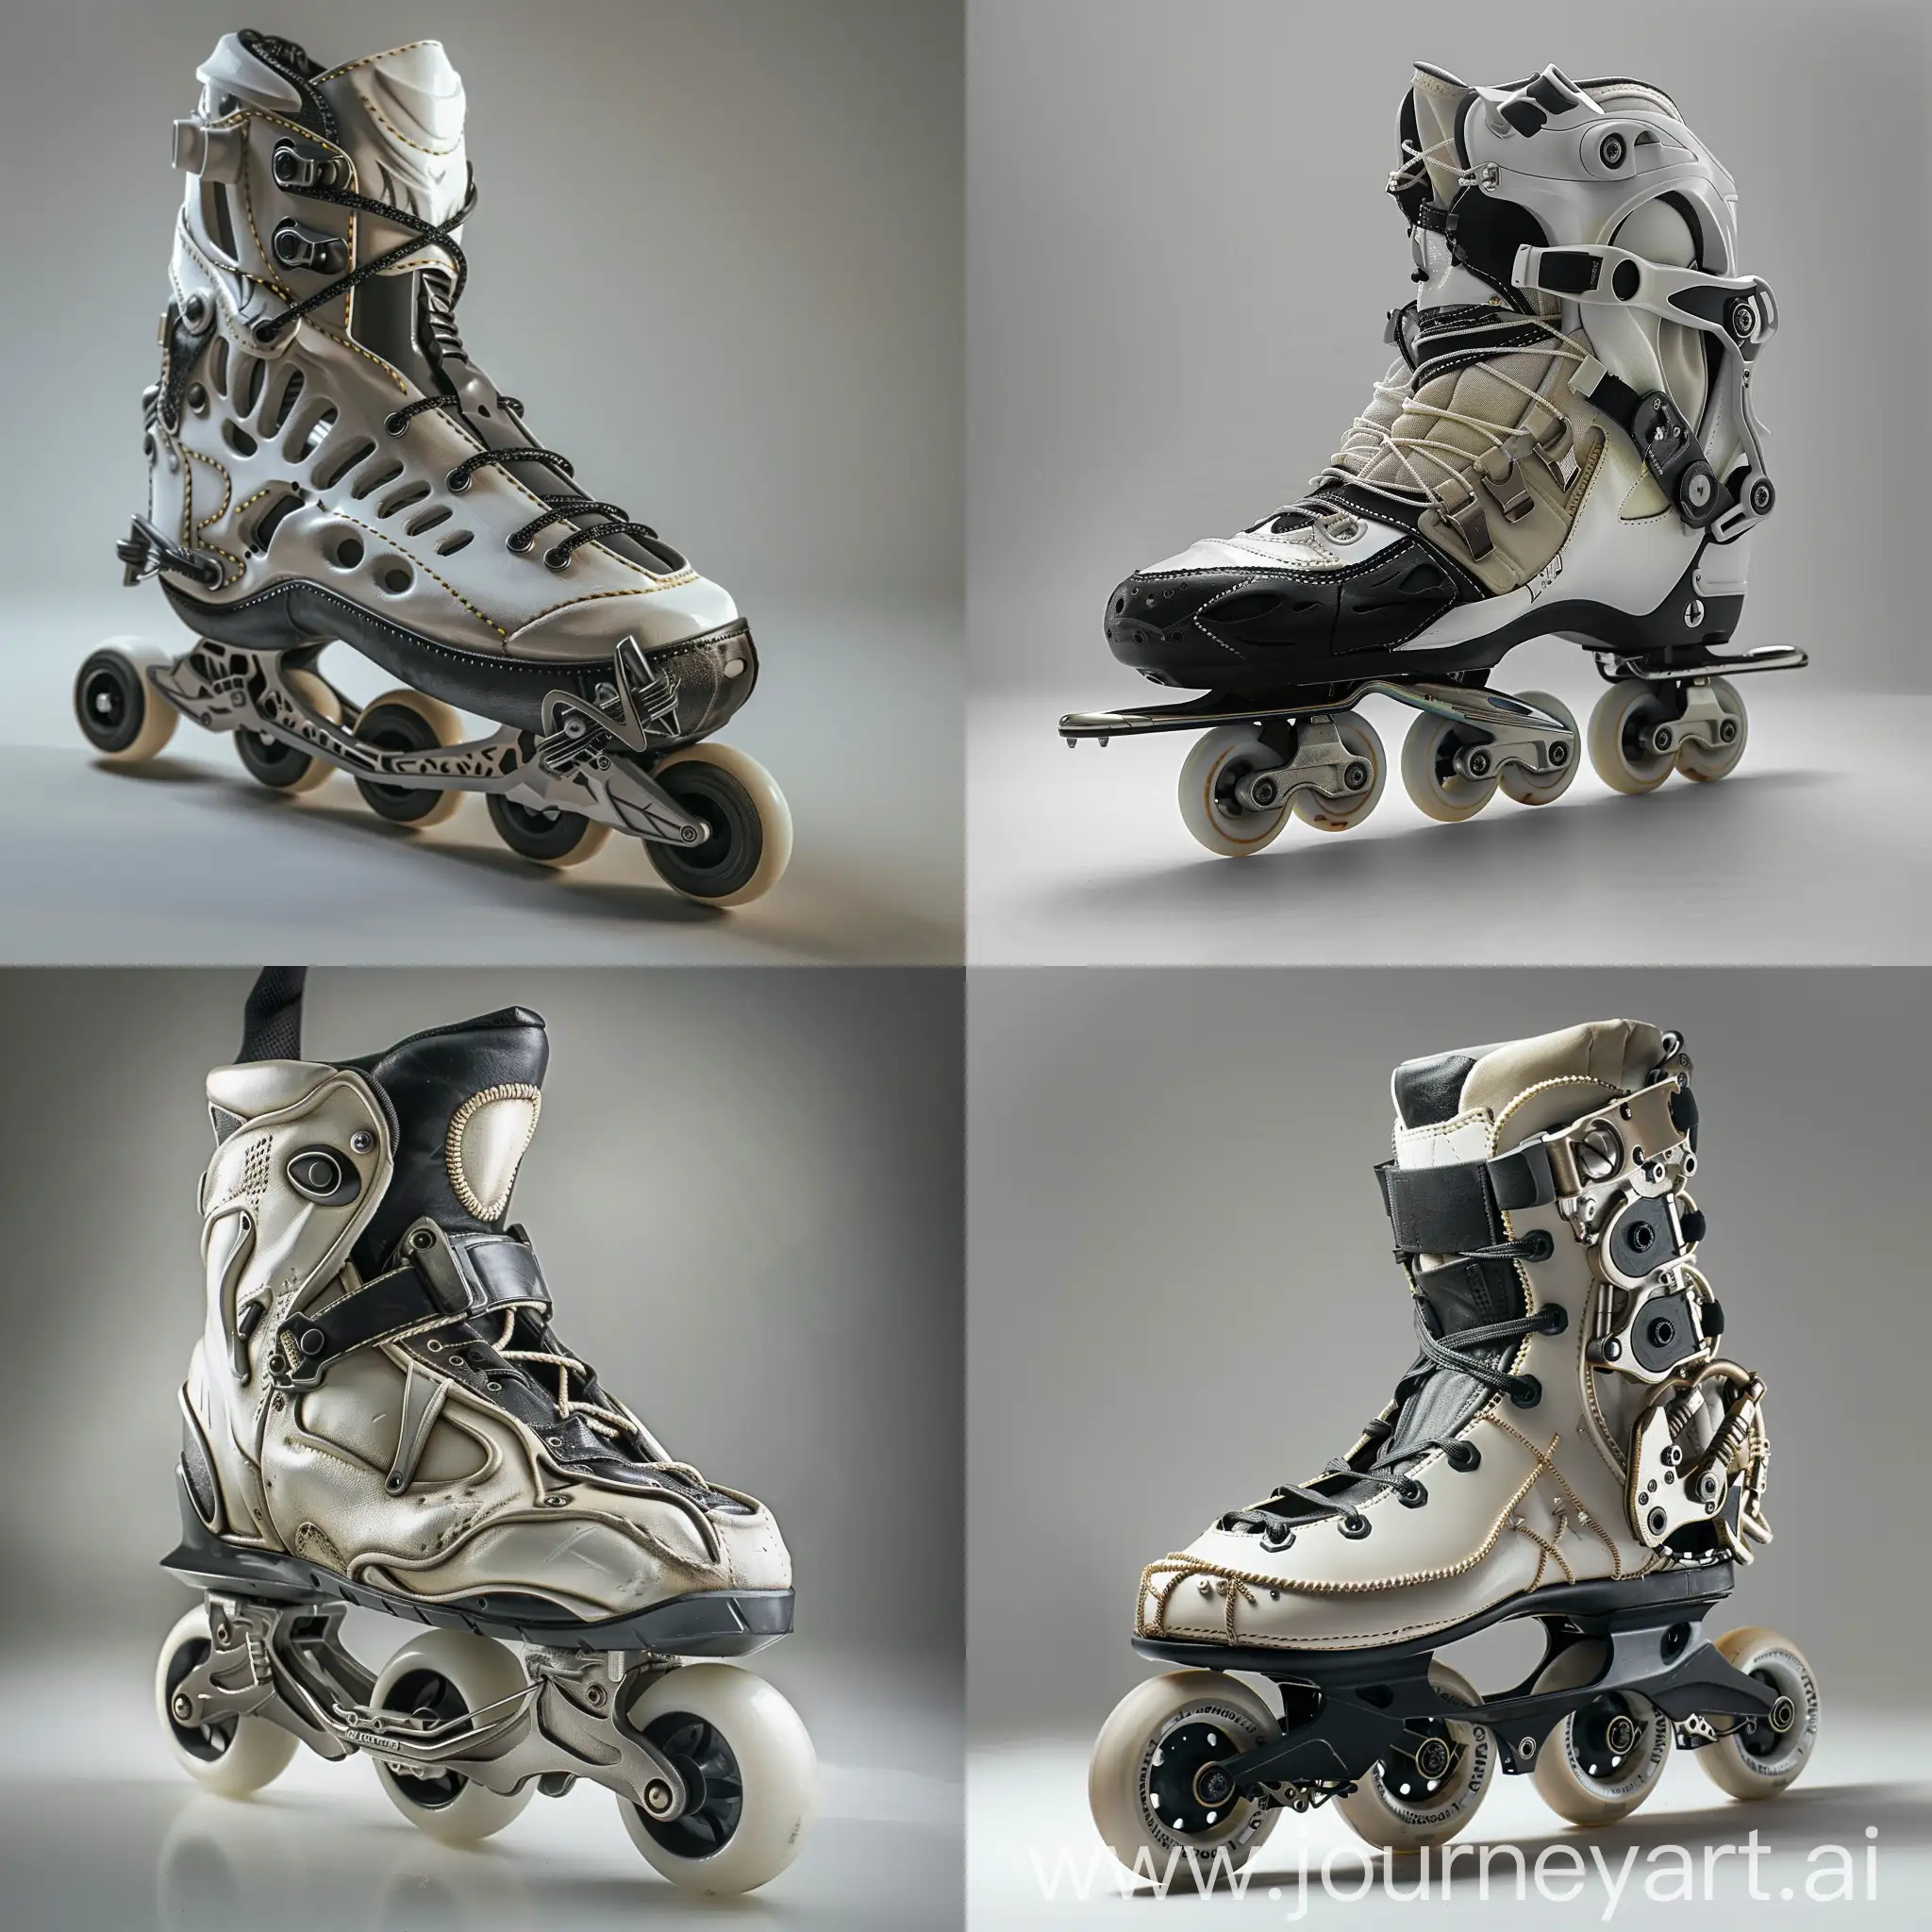 
A roller skate, cyberpunk style, mechanical style, white metal, black leather, exaggerated metal accessories, light gray background, delicate stitching, exaggerated movements, studio lighting, pinhole photography style, soft edges and high details, Nikon d75 photos